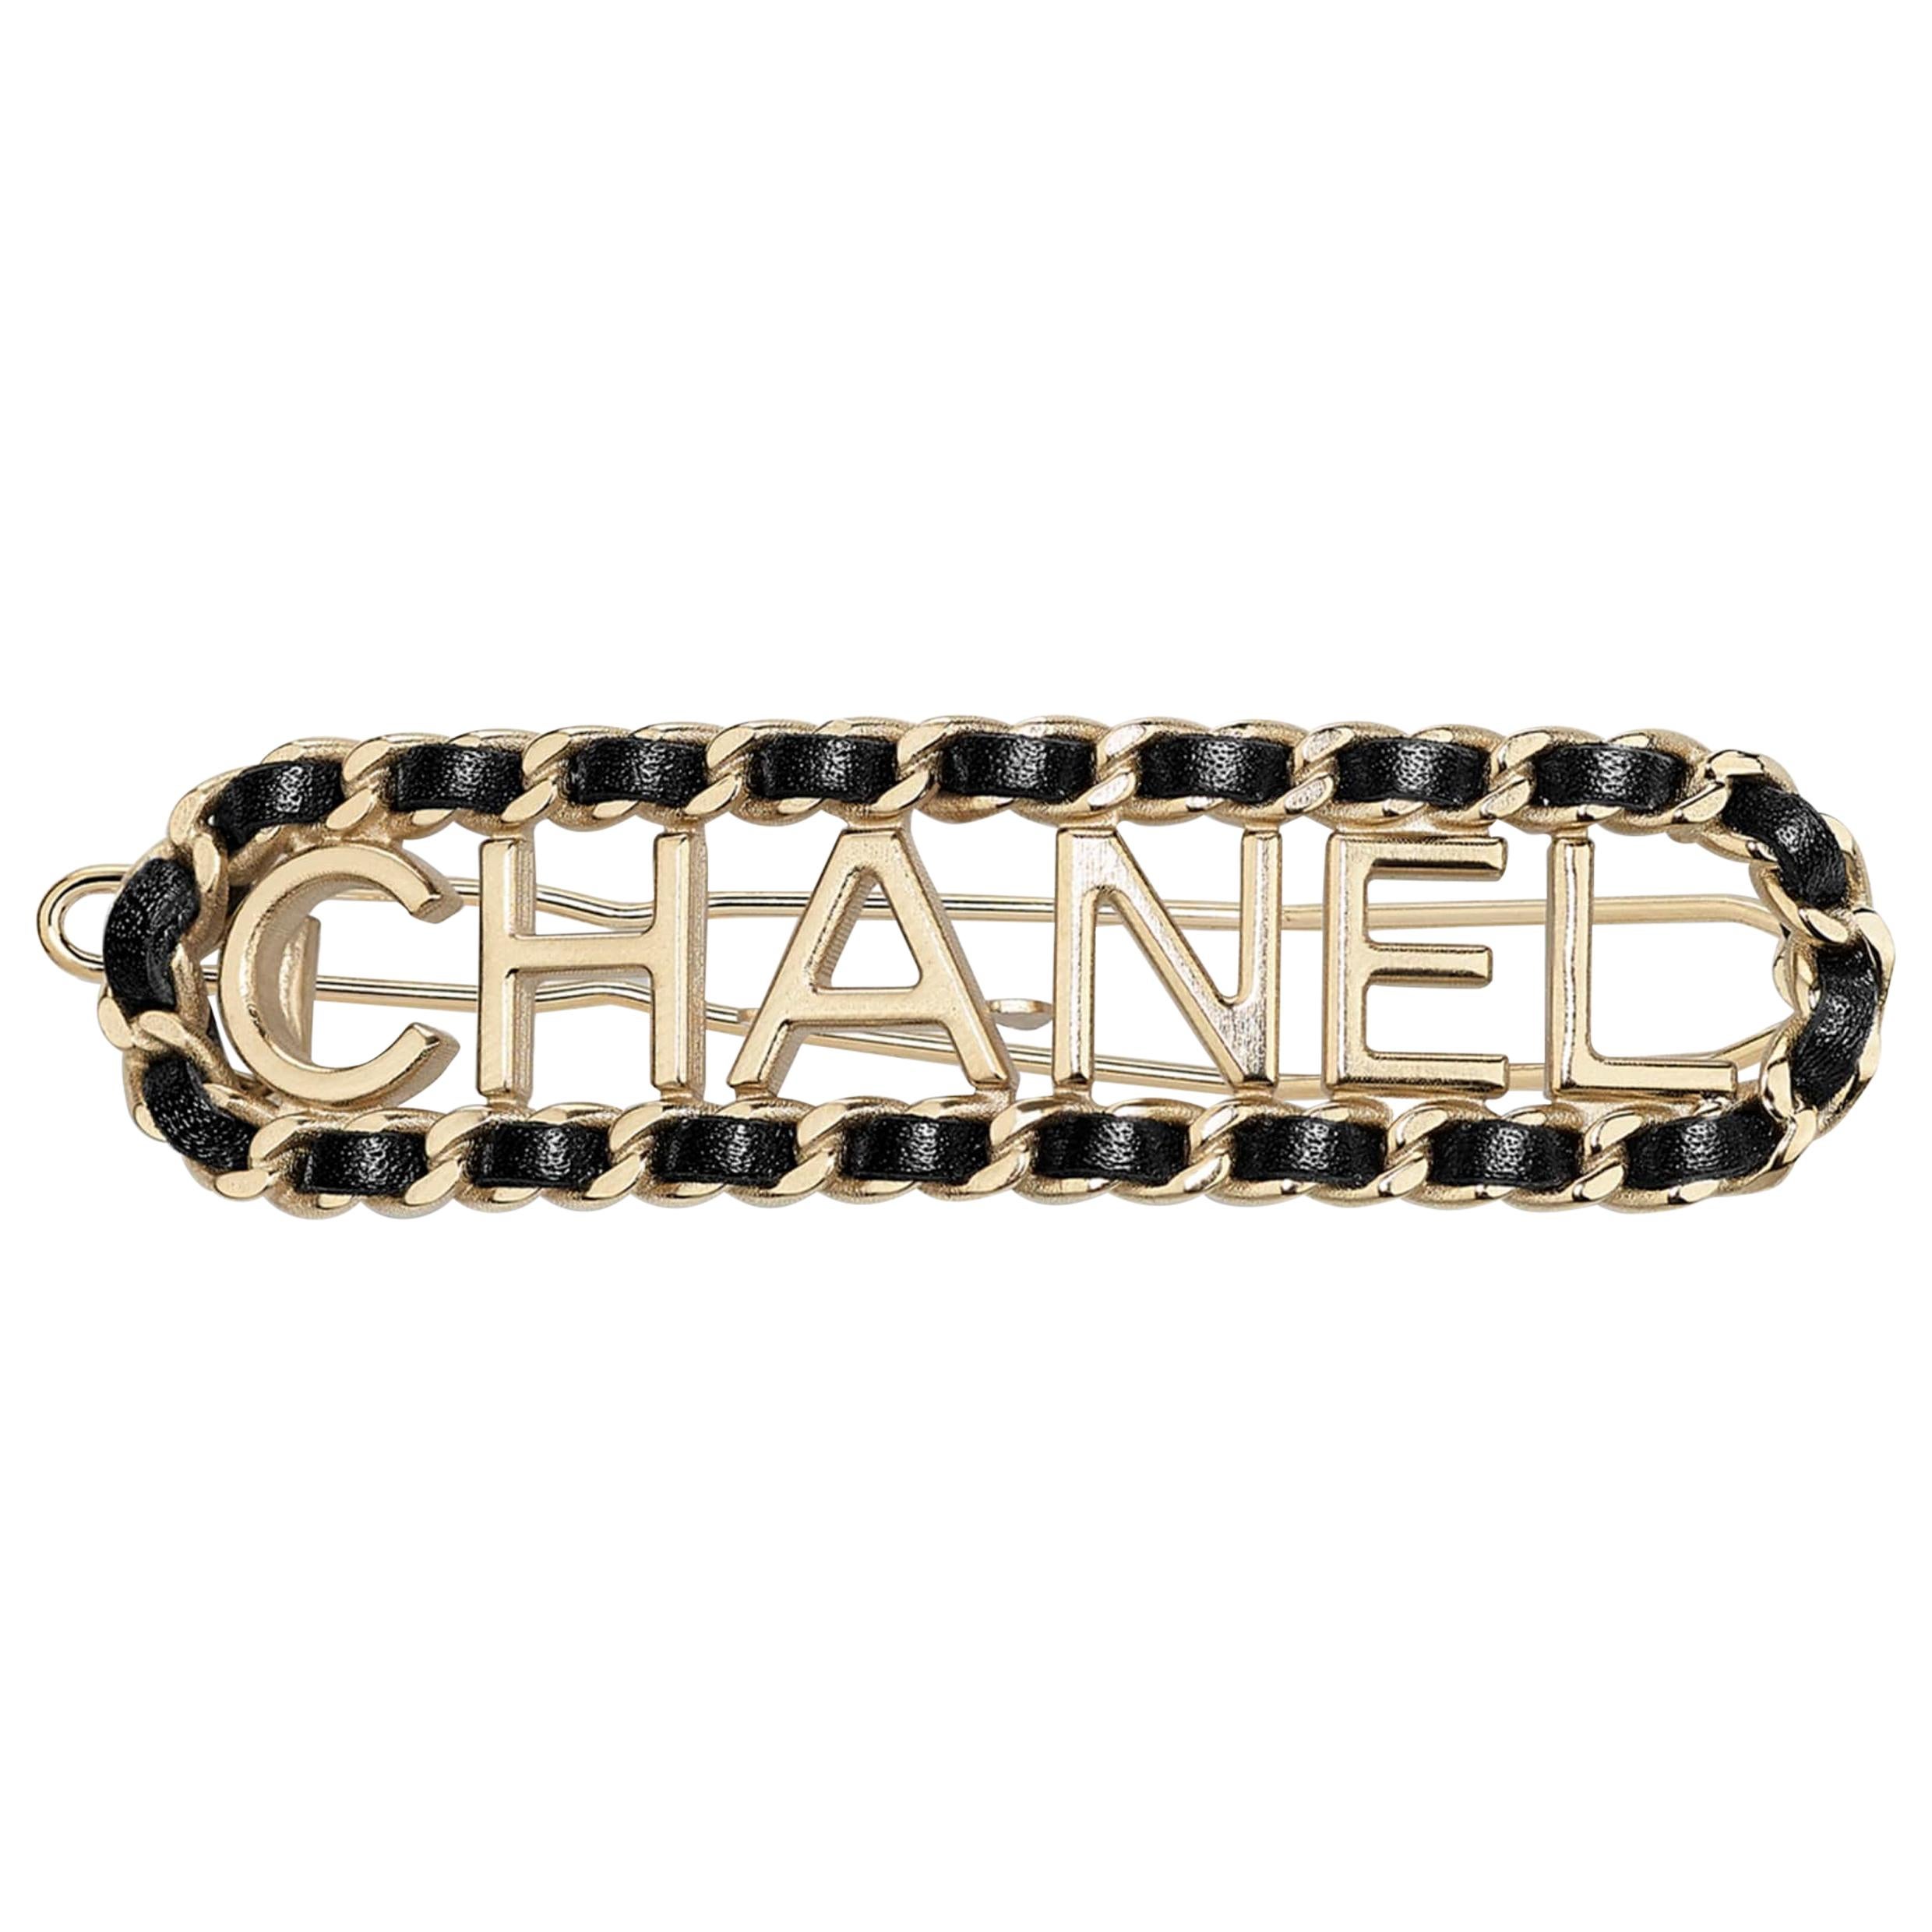      CHANEL Hair Clip Metal & Lambskin Gold & Black  NEW WITH TAGS 